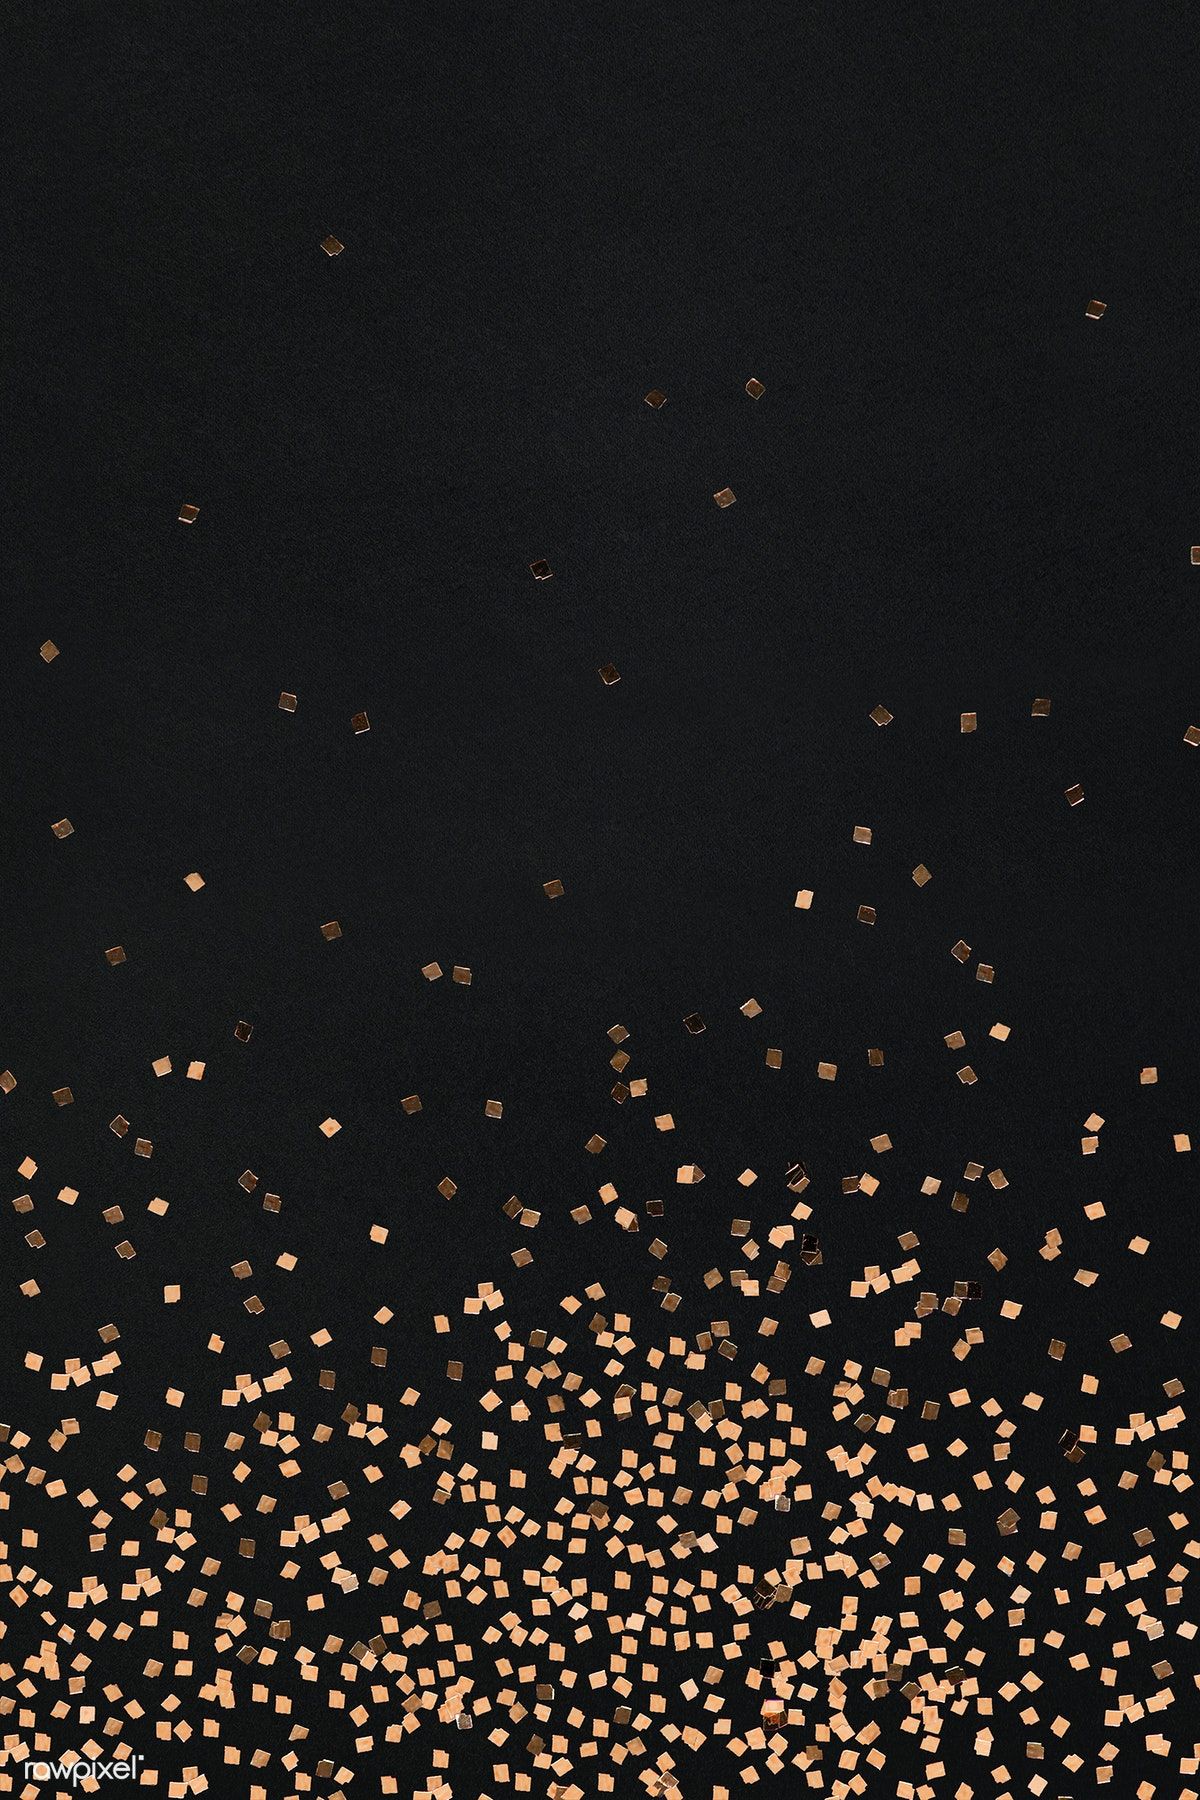 Dusty gold particles pattern background illustration. free image by rawpixel.com / Aew. Background patterns, Dark background wallpaper, Light background image